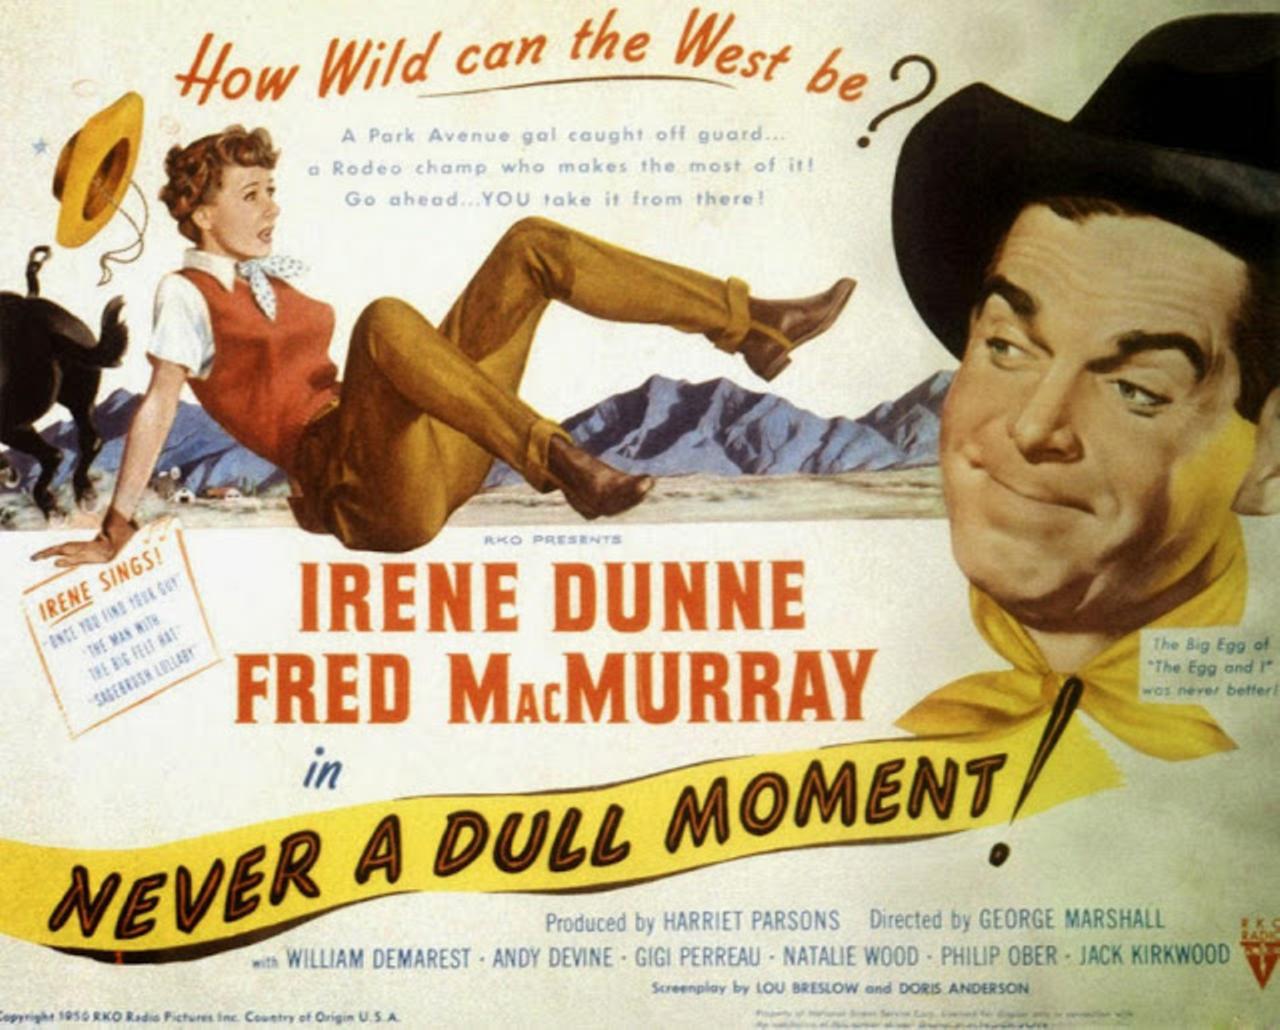 NEVER A DULL MOMENT (1950) WEB SITE